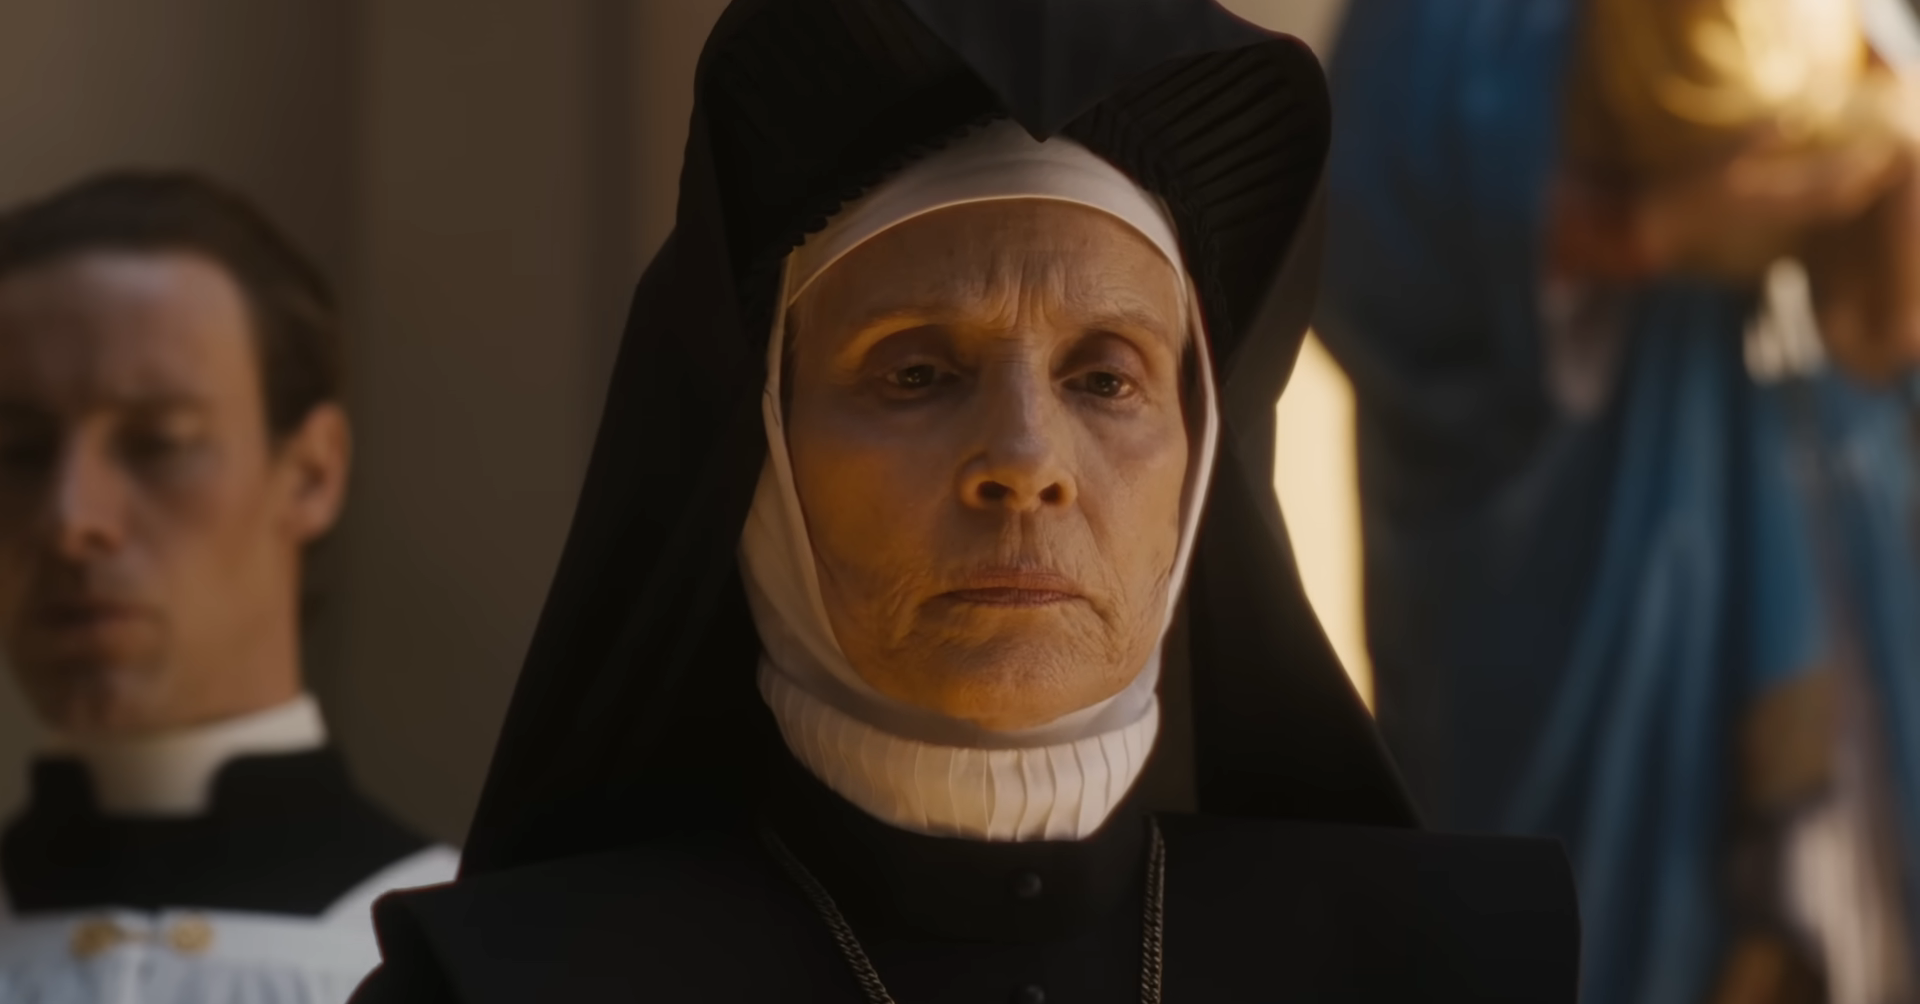 Character in nun attire with solemn expression, part of a scene in a film